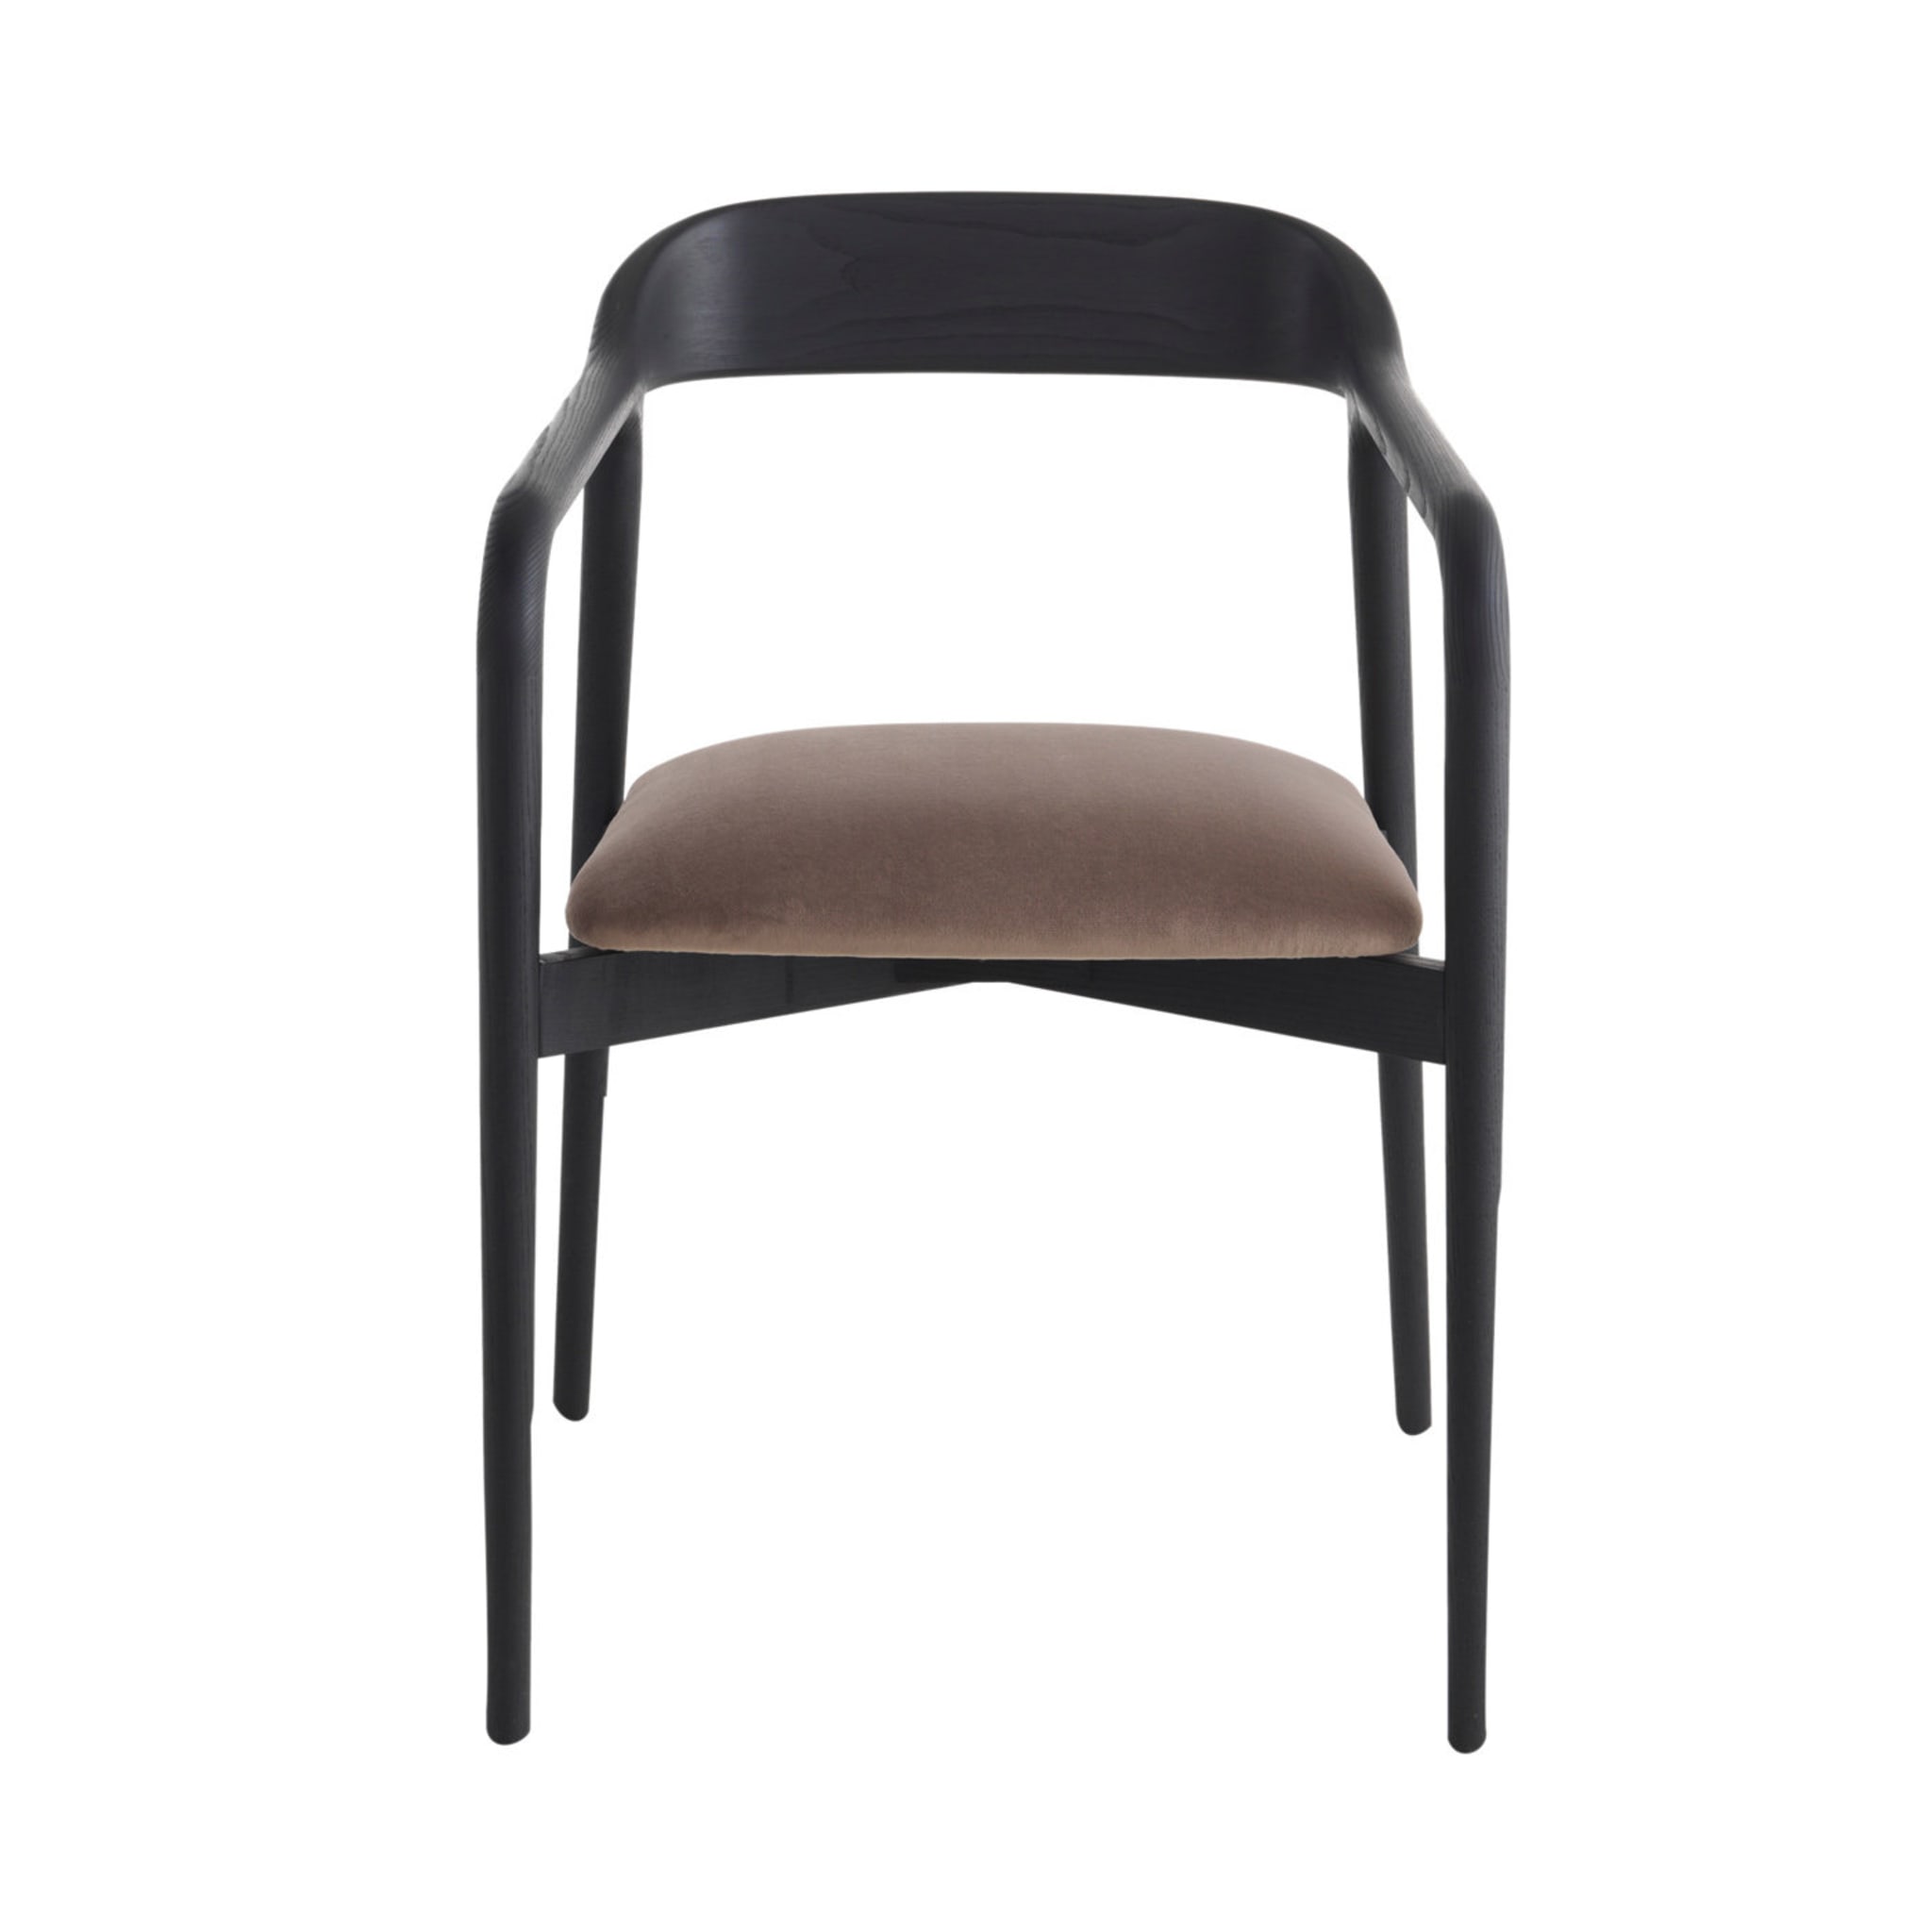 Velasca Ash Wood Beige Chair by Studio Balutto - Main view